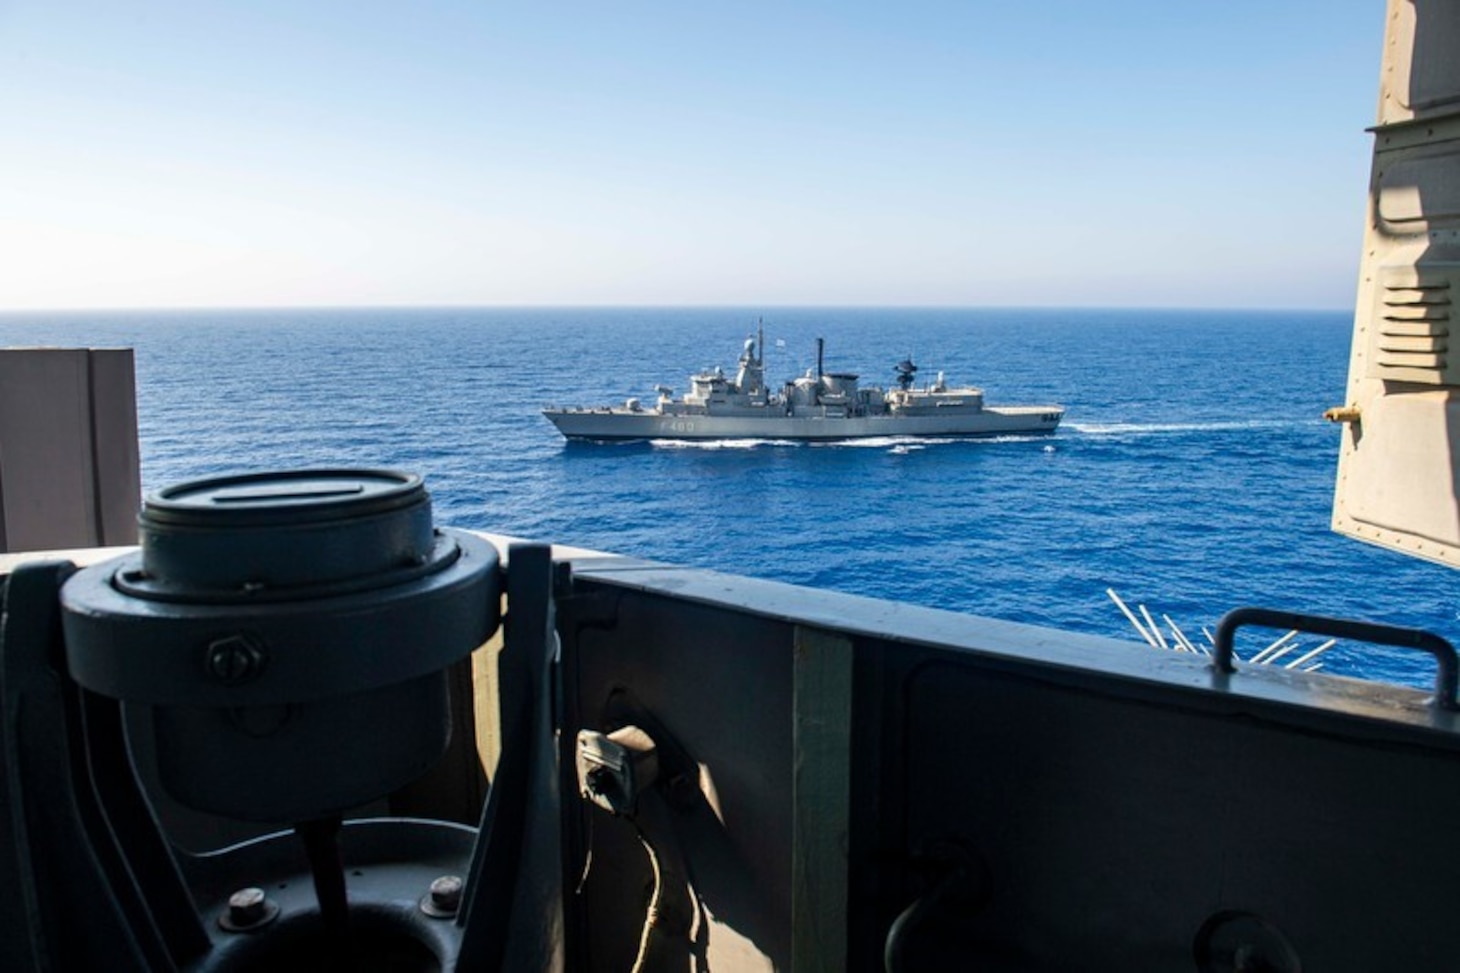 200726-N-KT825-1066 MEDITERRANEAN SEA (July 26, 2020) The Hellenic Navy frigate HN Aegean (FFGH 460) sails alongside the Nimitz-class aircraft carrier USS Dwight D. Eisenhower (CVN 69) in the Mediterranean Sea, July 26, 2020. The Dwight D. Eisenhower Strike Group is conducting operations in U.S. 6th fleet area of operations in support of U.S. national security interests in Europe and Africa. (U.S. Navy photo by Mass Communication Specialist 3rd Class Sawyer Haskins)